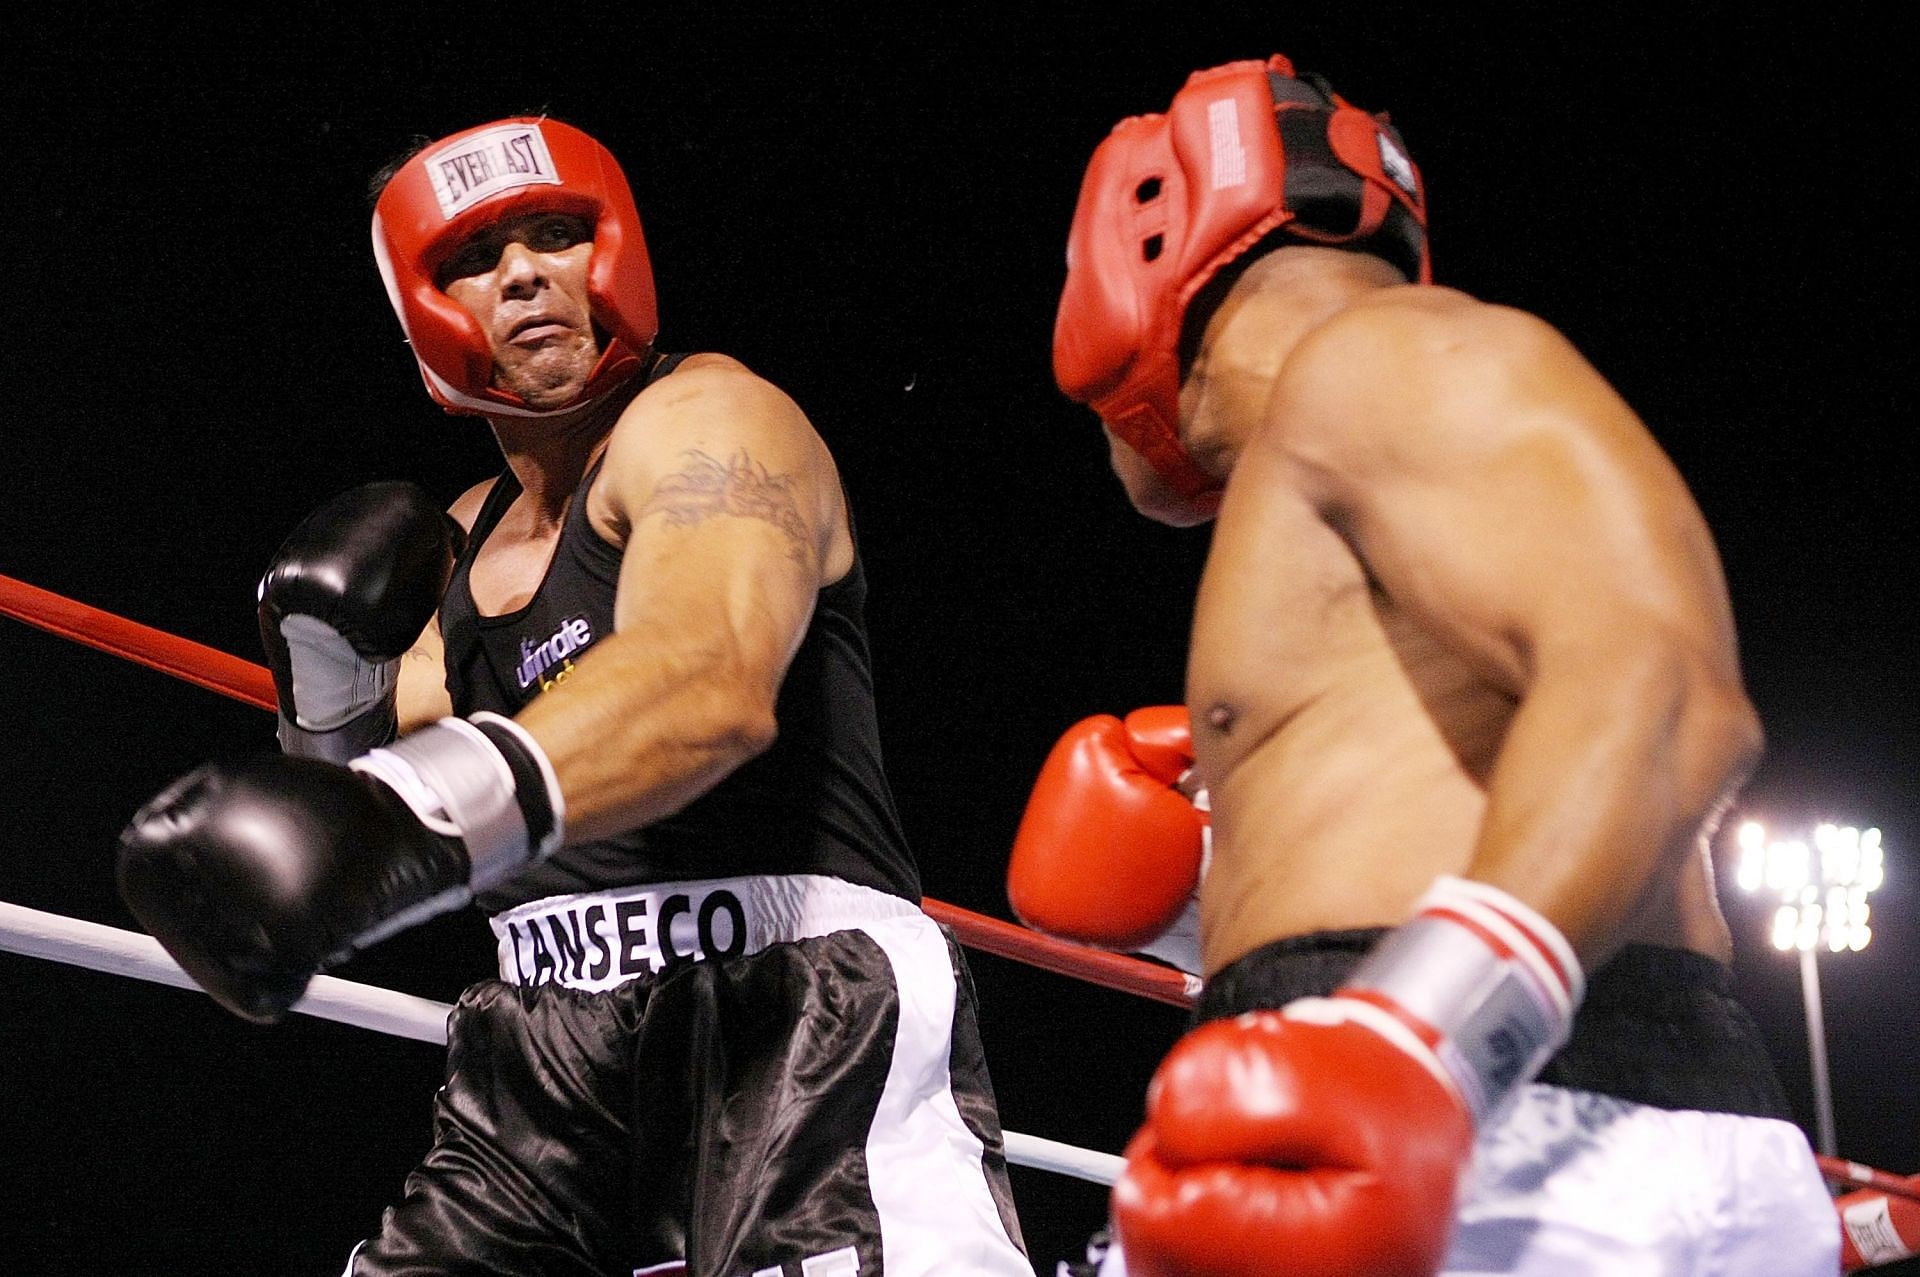 Jose Canseco v Via Sikahema: ATLANTIC CITY, NJ - JULY 12: (L-R) Former Major League Baseball player Jose Canseco (L) swings a left at former NFL player Via Sikahema during their celebrity boxing match on July 12, 2008 at Bernie Robbins Stadium in Atlantic City, New Jersey. (Photo by Nick Laham/Getty Images)